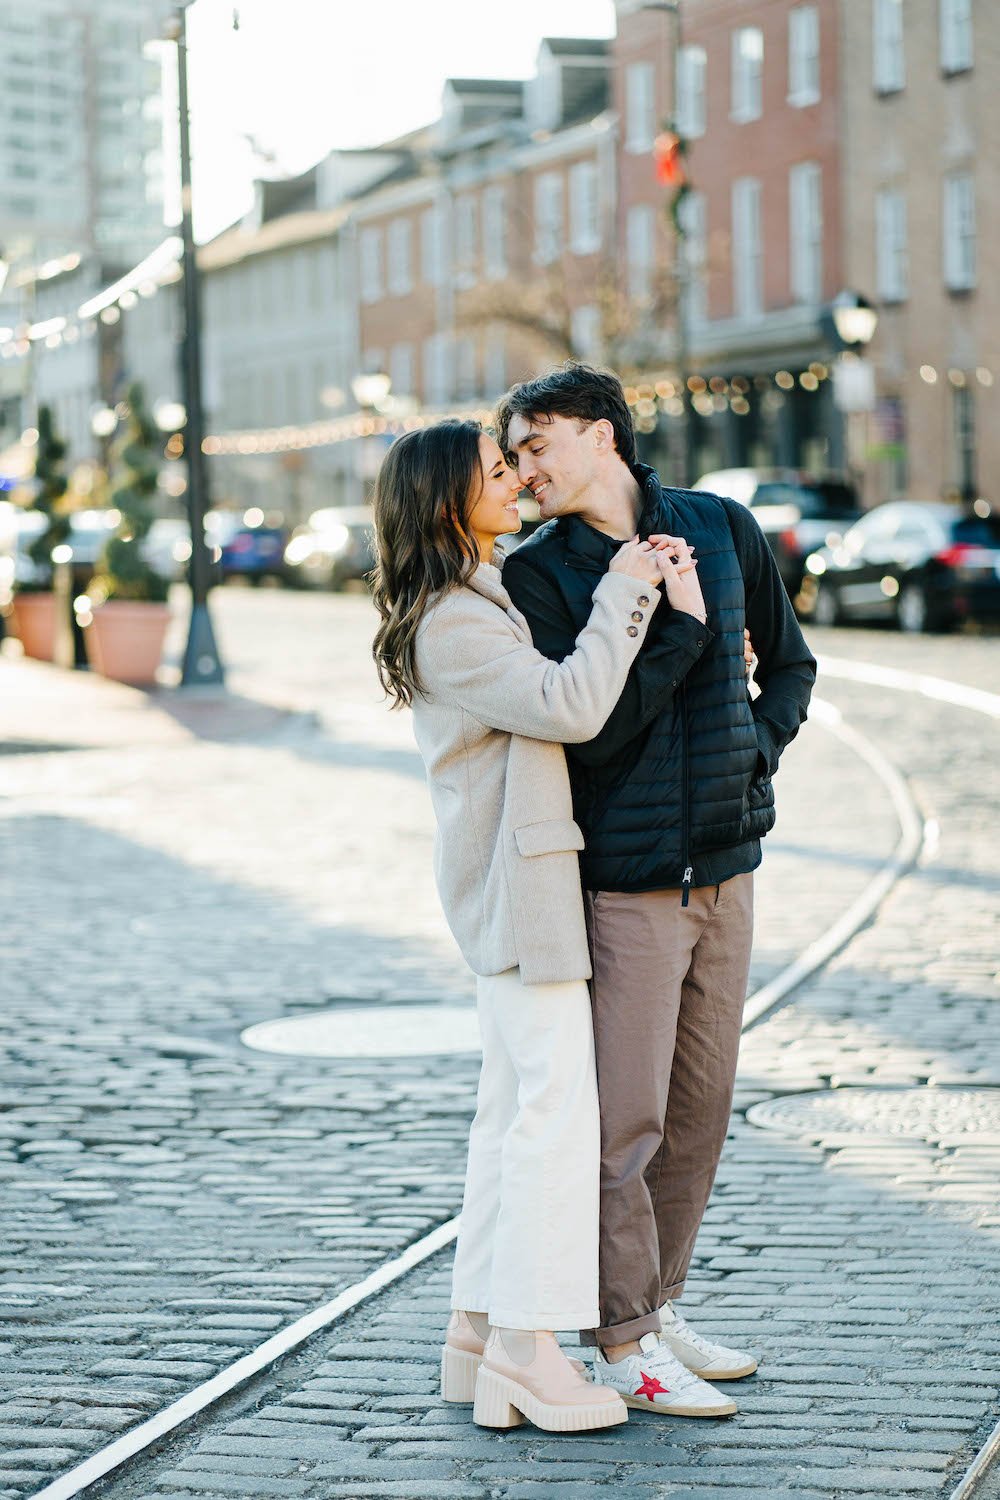 winter_wedding_engagement_session_fells_point_baltimore_maryland_love_life_images 0004.jpg